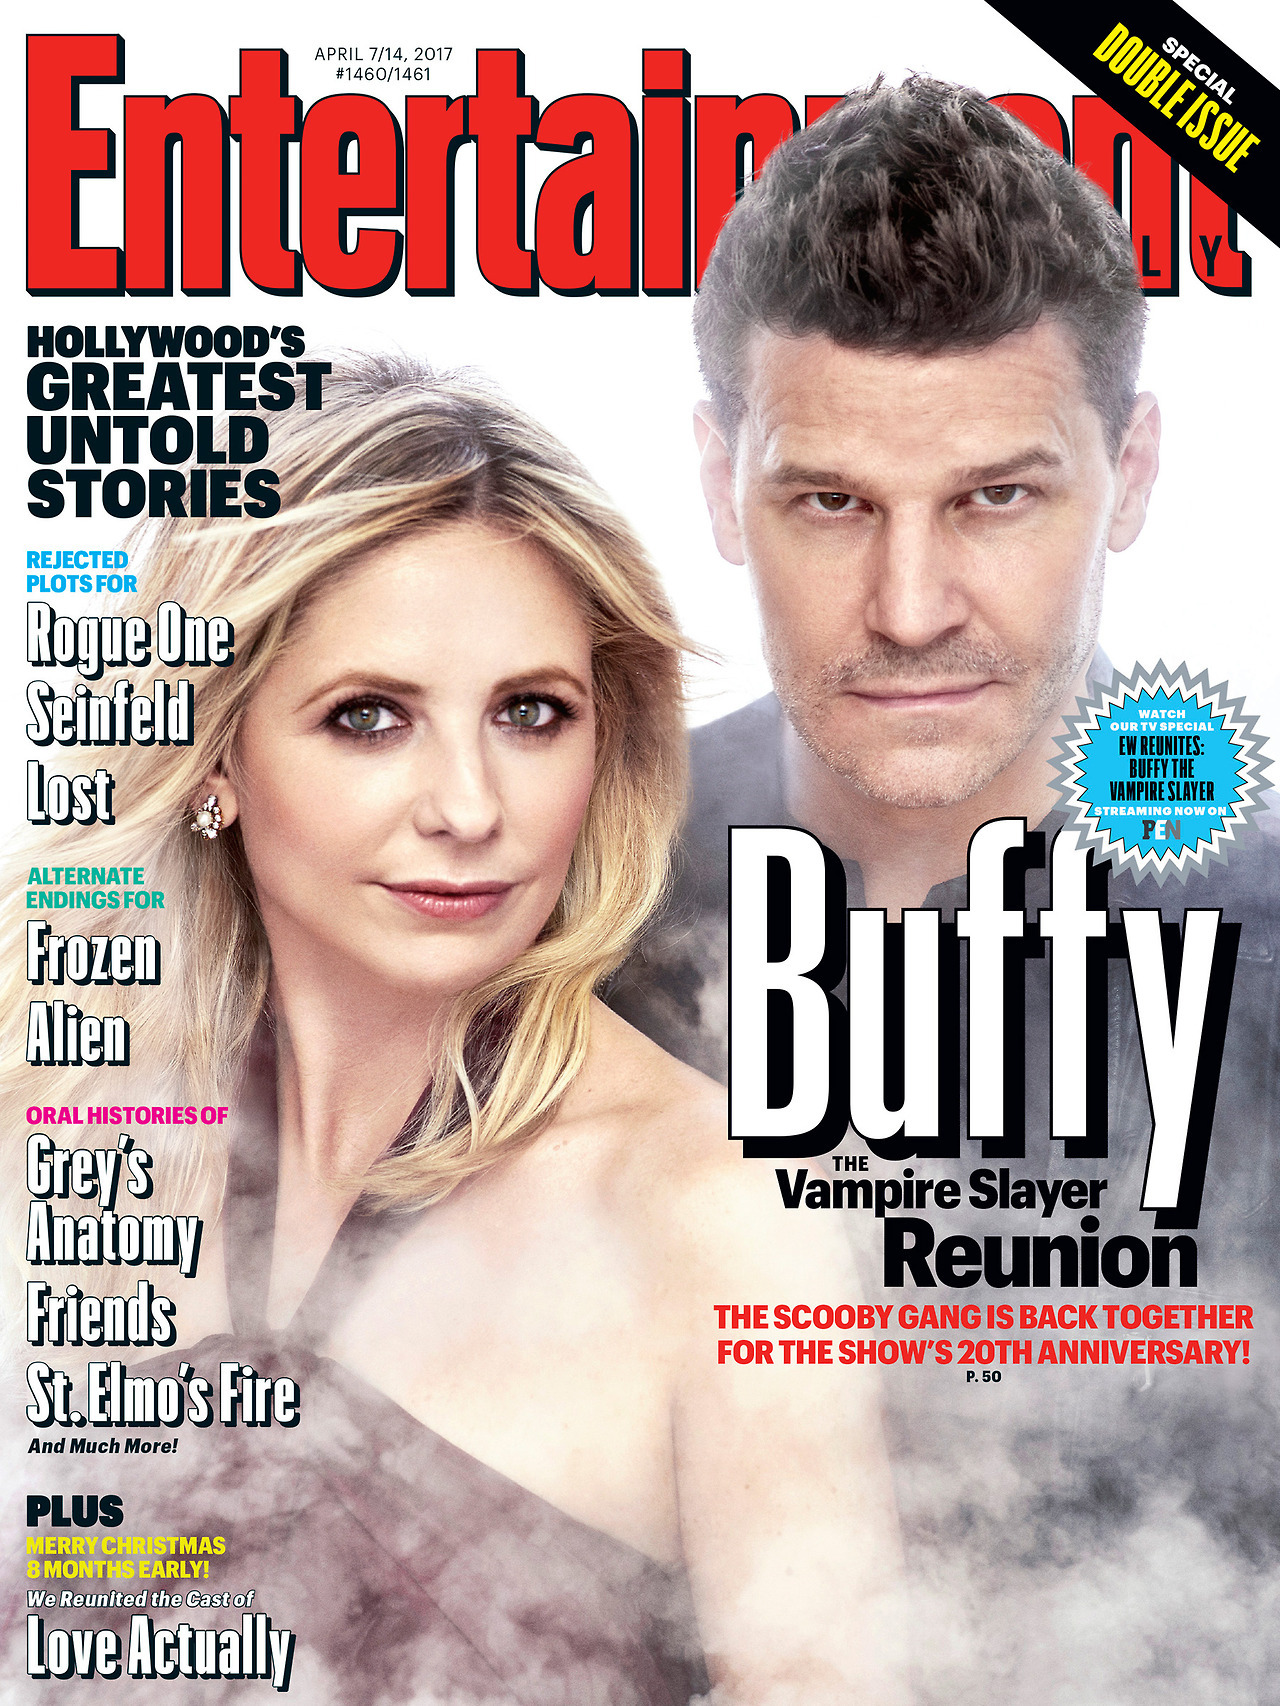 It’s the Buffy Reunion You’ve Been Waiting For!
“Here’s the sitch: After 20 years, we’ve reunited the cast of Buffy the Vampire Slayer for our issue of Hollywood’s greatest untold stories! We are TOTALLY wigging out.
”